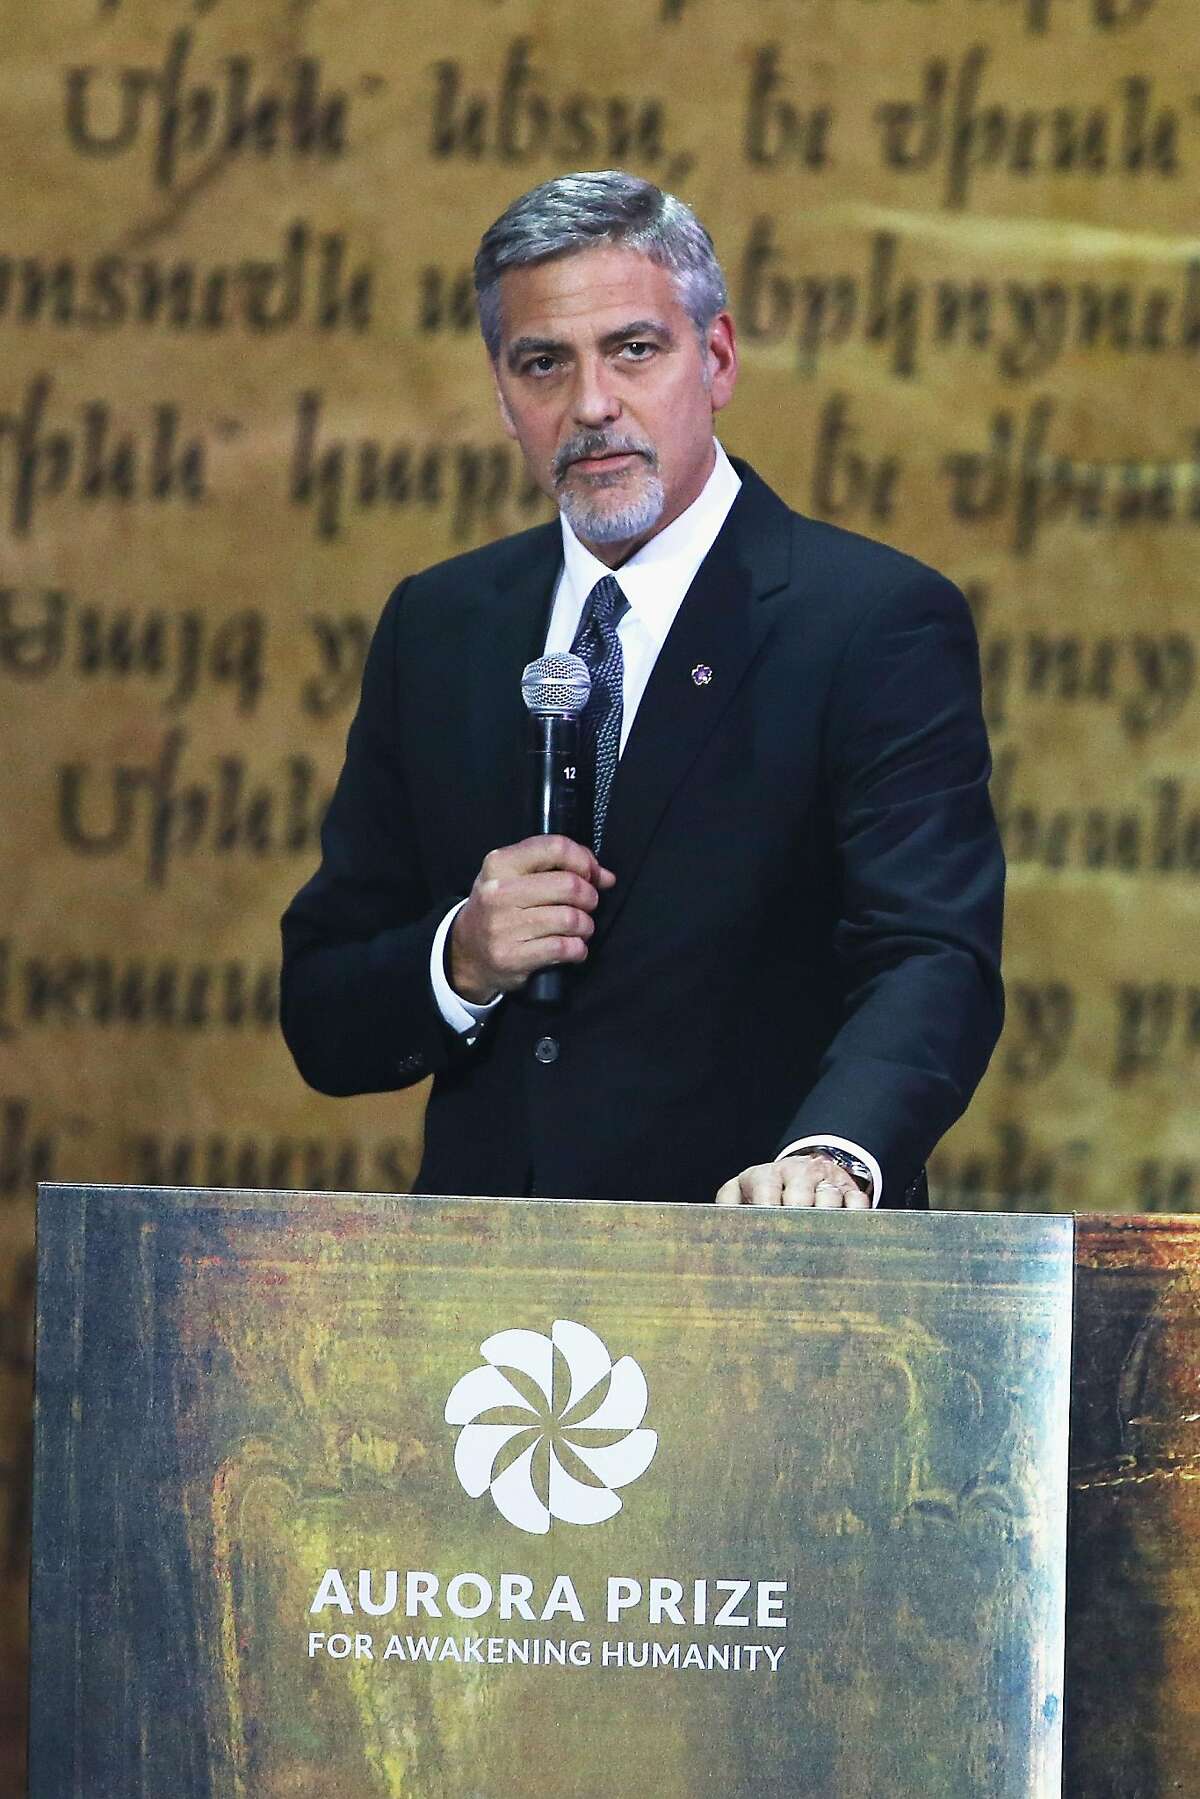 YEREVAN, ARMENIA - APRIL 24: George Clooney, Co-Chair of the Selection Committee, honors Aurora Prize Laureate Marguerite Barankitse and finalists Syeda Ghulam Fatima, Father Bernard Kinvi and Dr. Tom Catena at the Aurora Prize ceremony on April 24, 2016 in Yerevan, Armenia. (Photo by Andreas Rentz/Getty Images for 100 Lives)